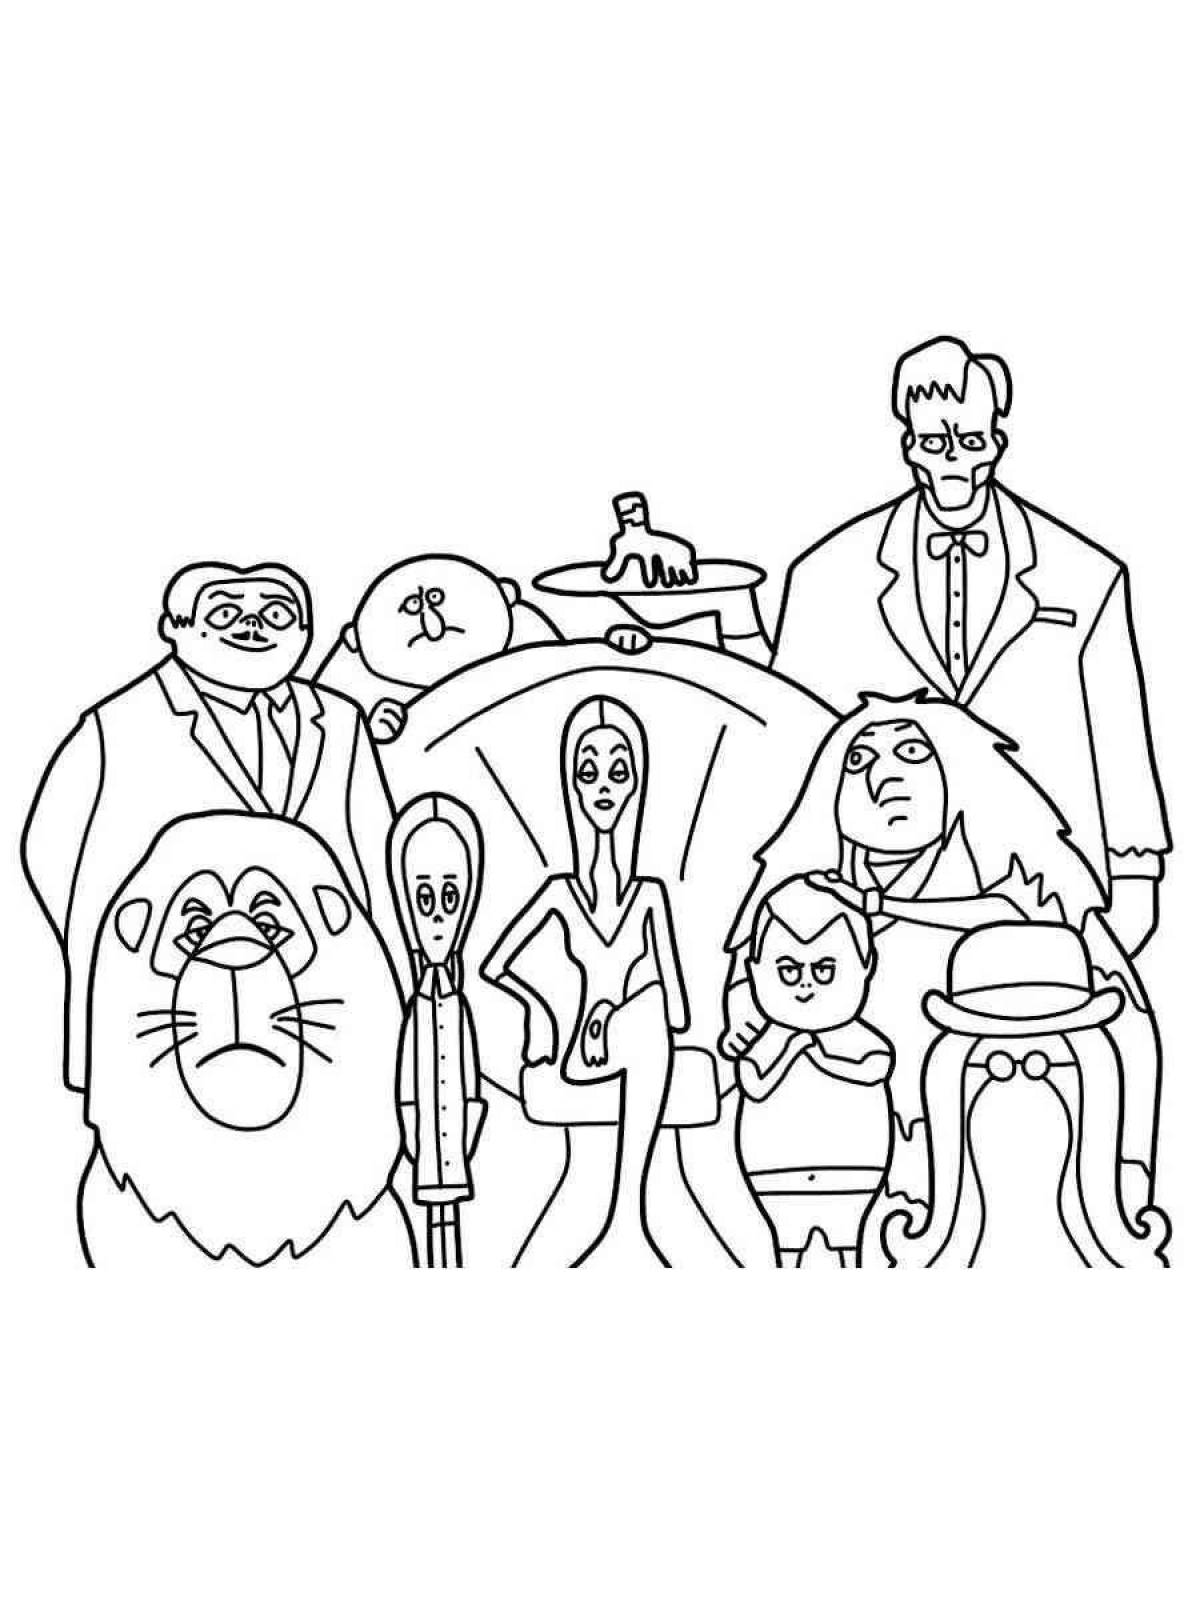 Coloring page marvelous mr hobbs